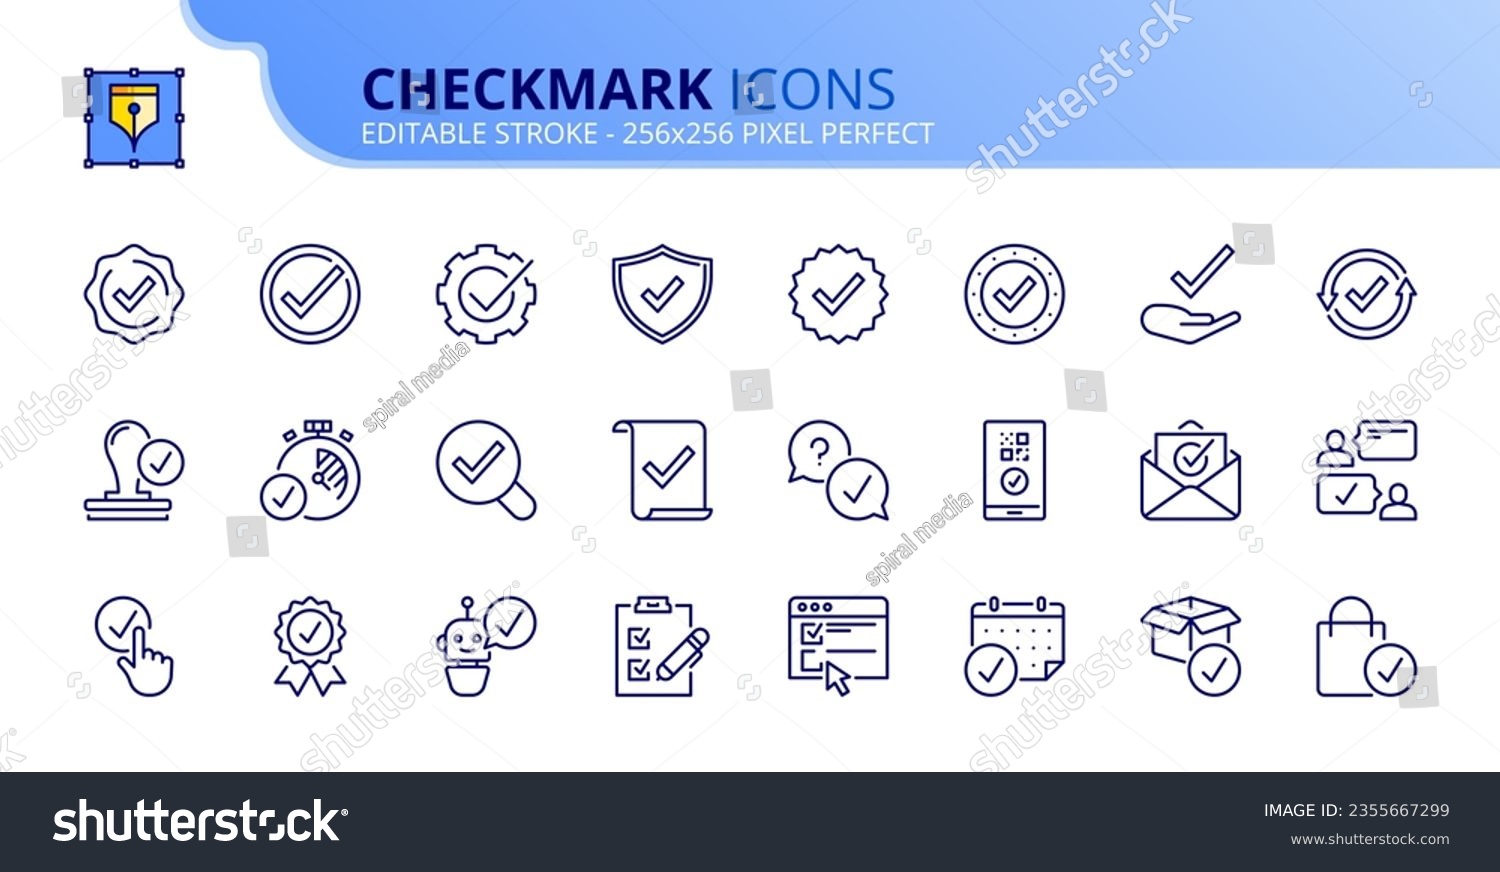 SVG of Line icons about checkmark. Contains such icons as checked, approved, certified, accepted and validation. Editable stroke Vector 256x256 pixel perfect svg